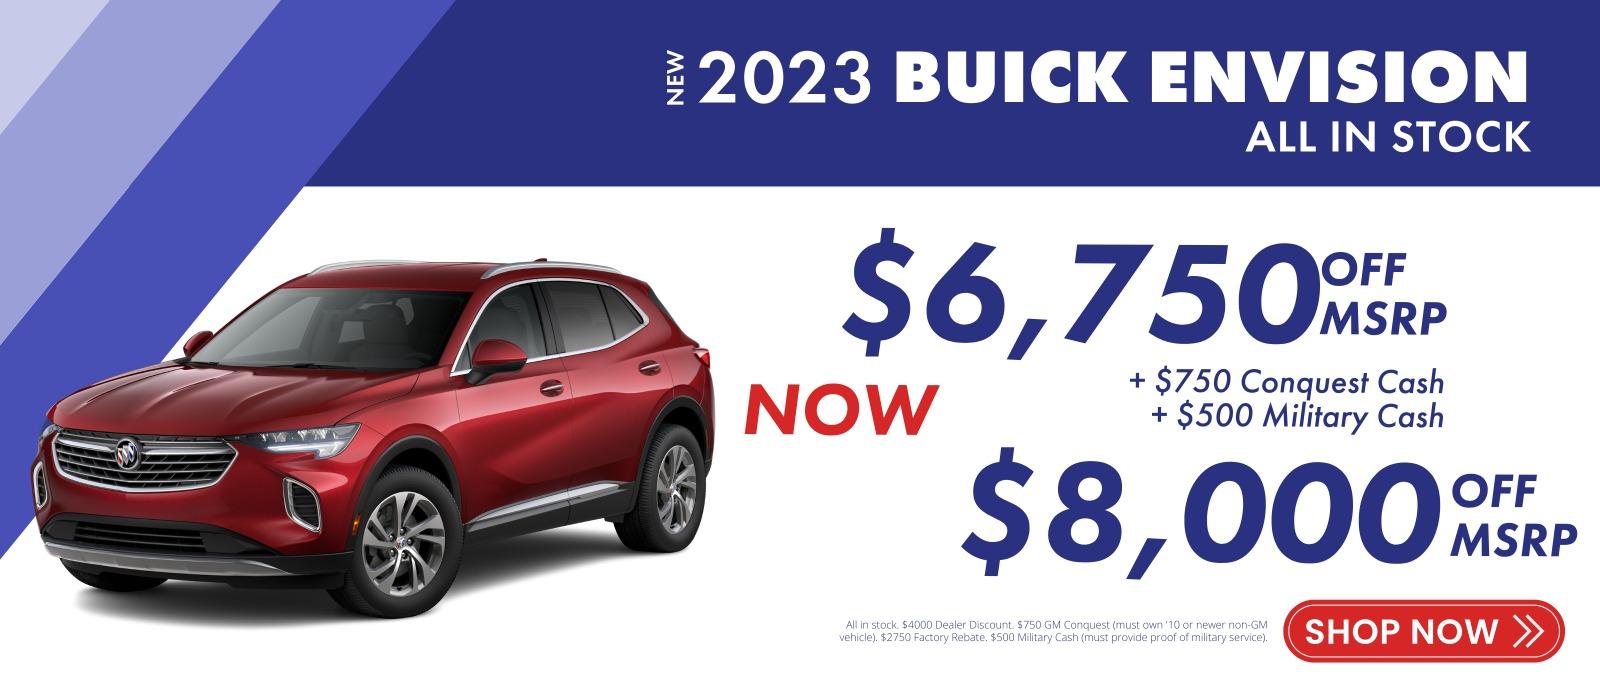 New 2023 Buick Envision